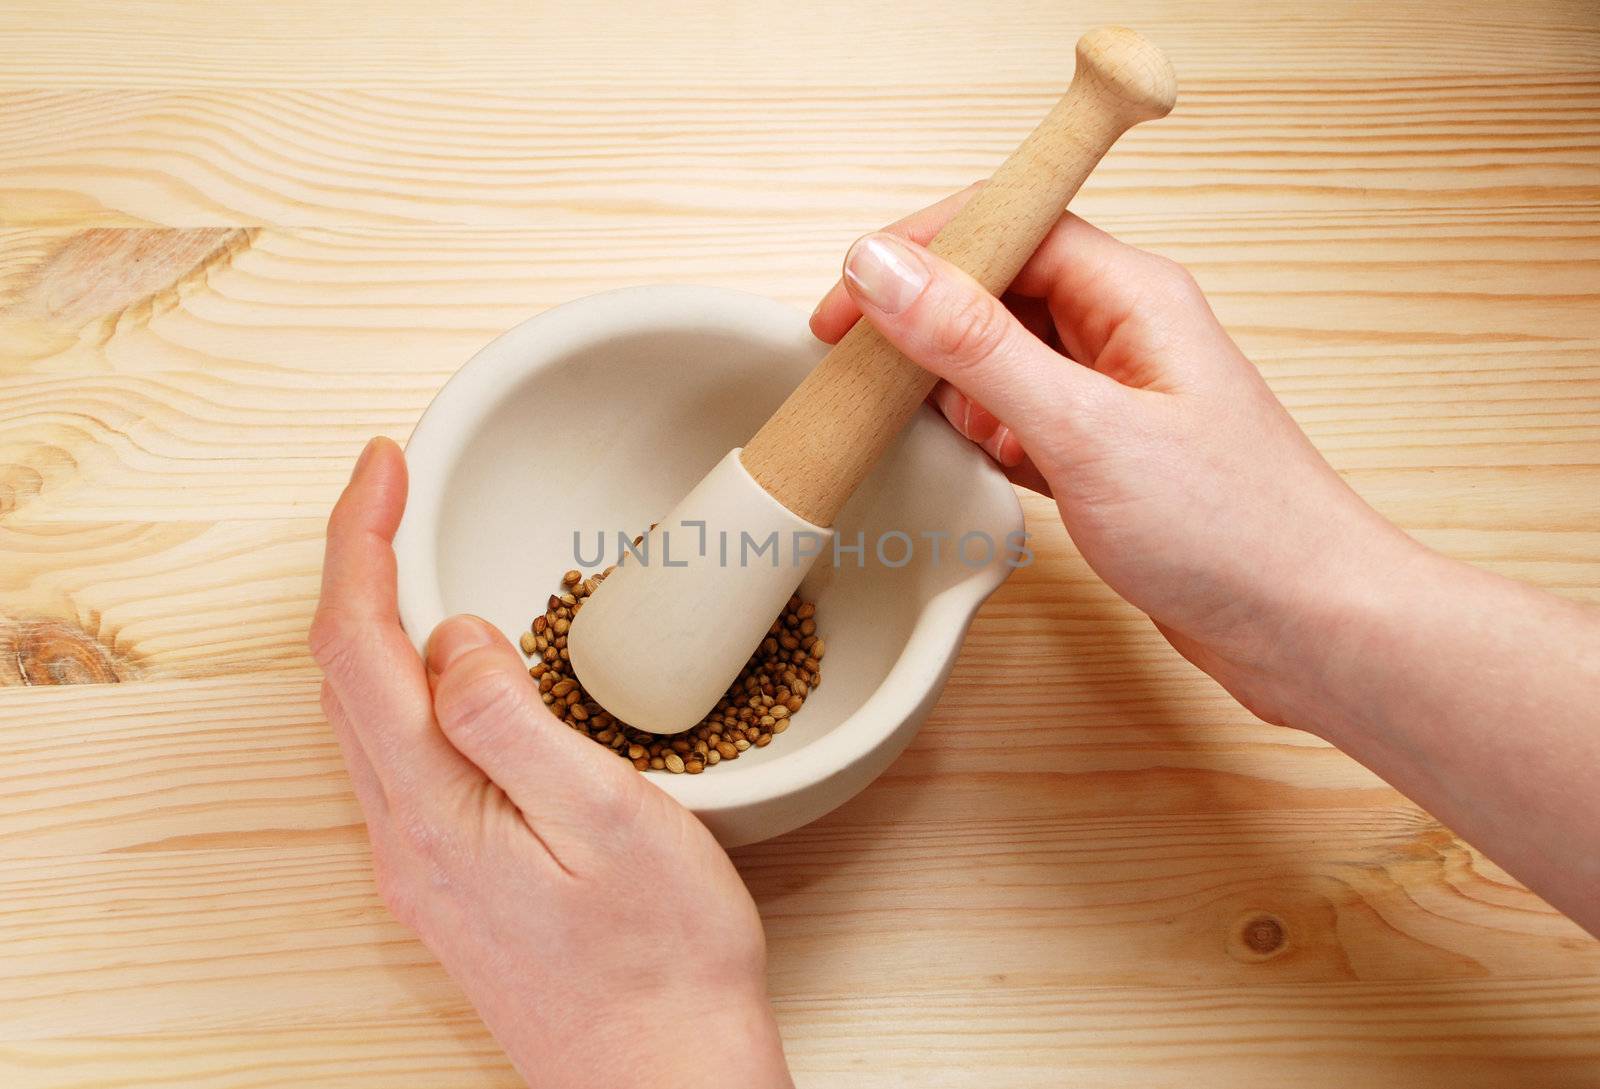 A woman uses a pestle and mortar on a wooden table to crush whole coriander seeds